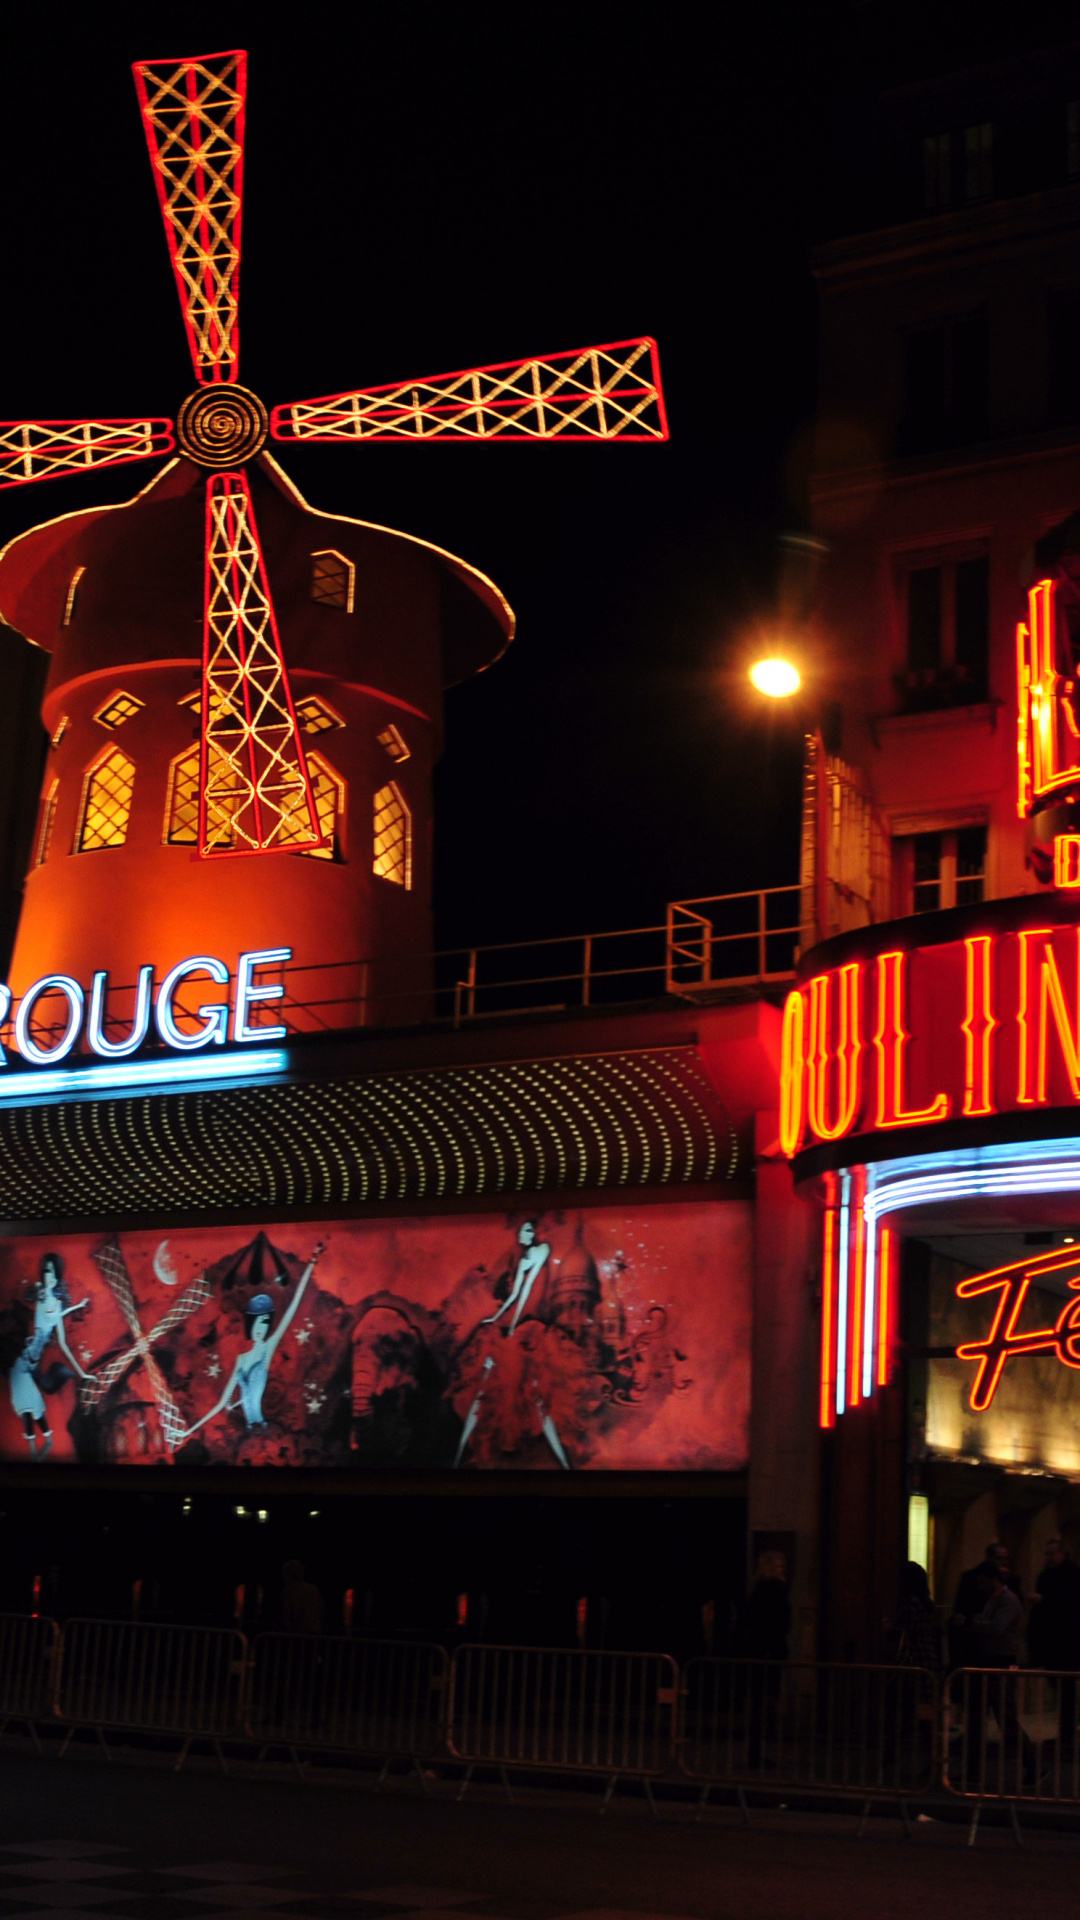 Moulin Rouge wallpapers, Rouge background, Travels expertise, Baton stores, 1080x1920 Full HD Phone